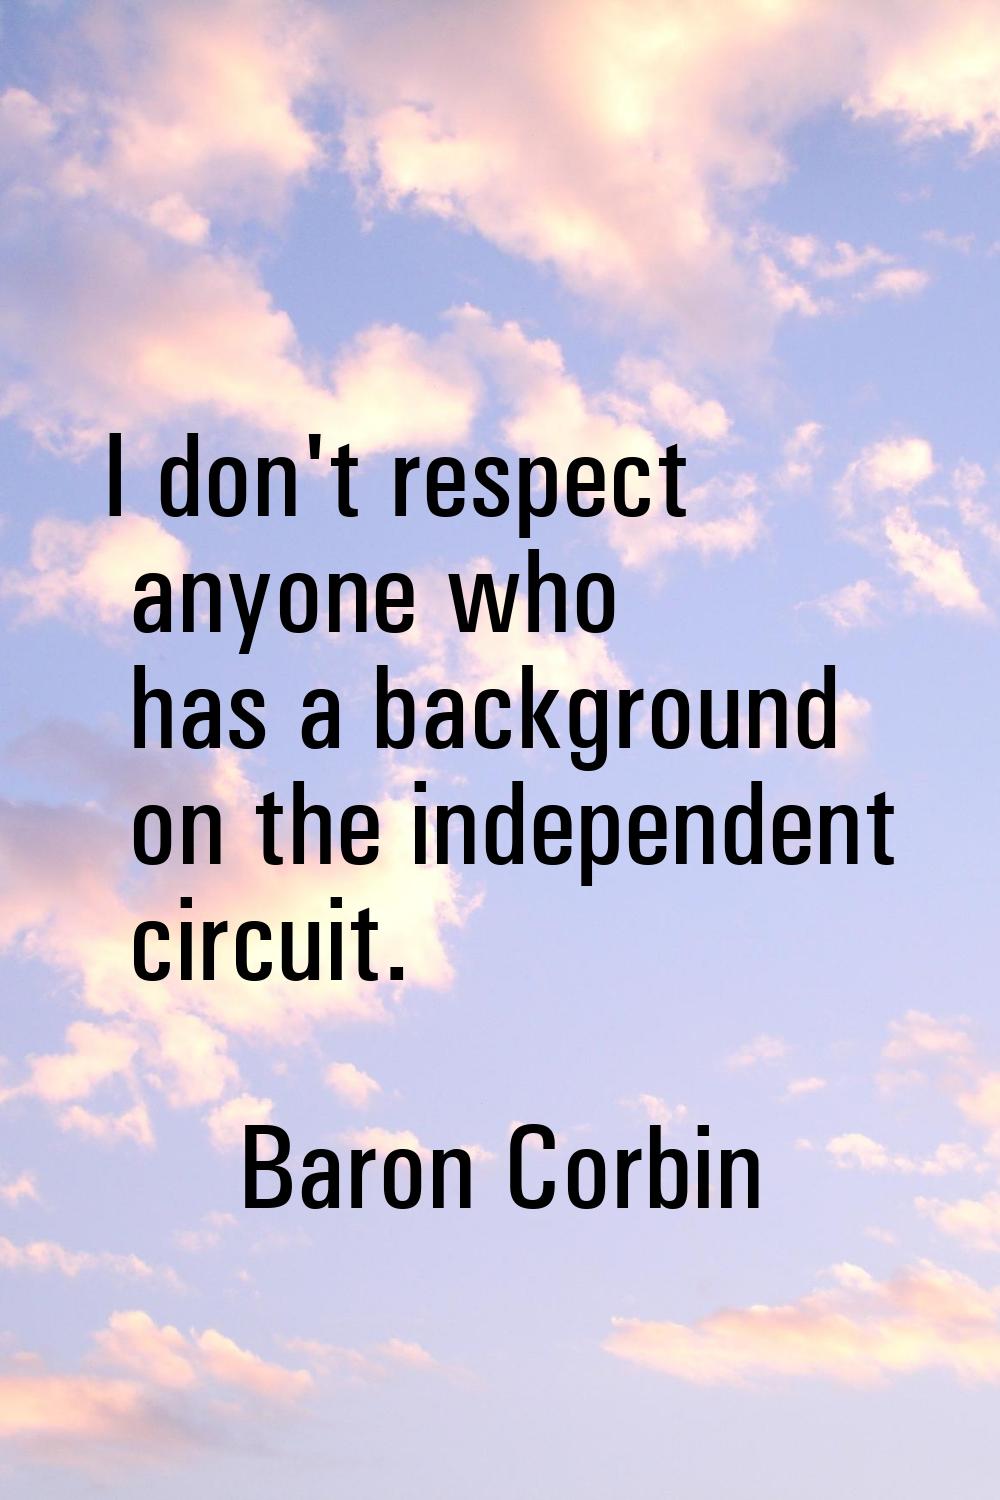 I don't respect anyone who has a background on the independent circuit.